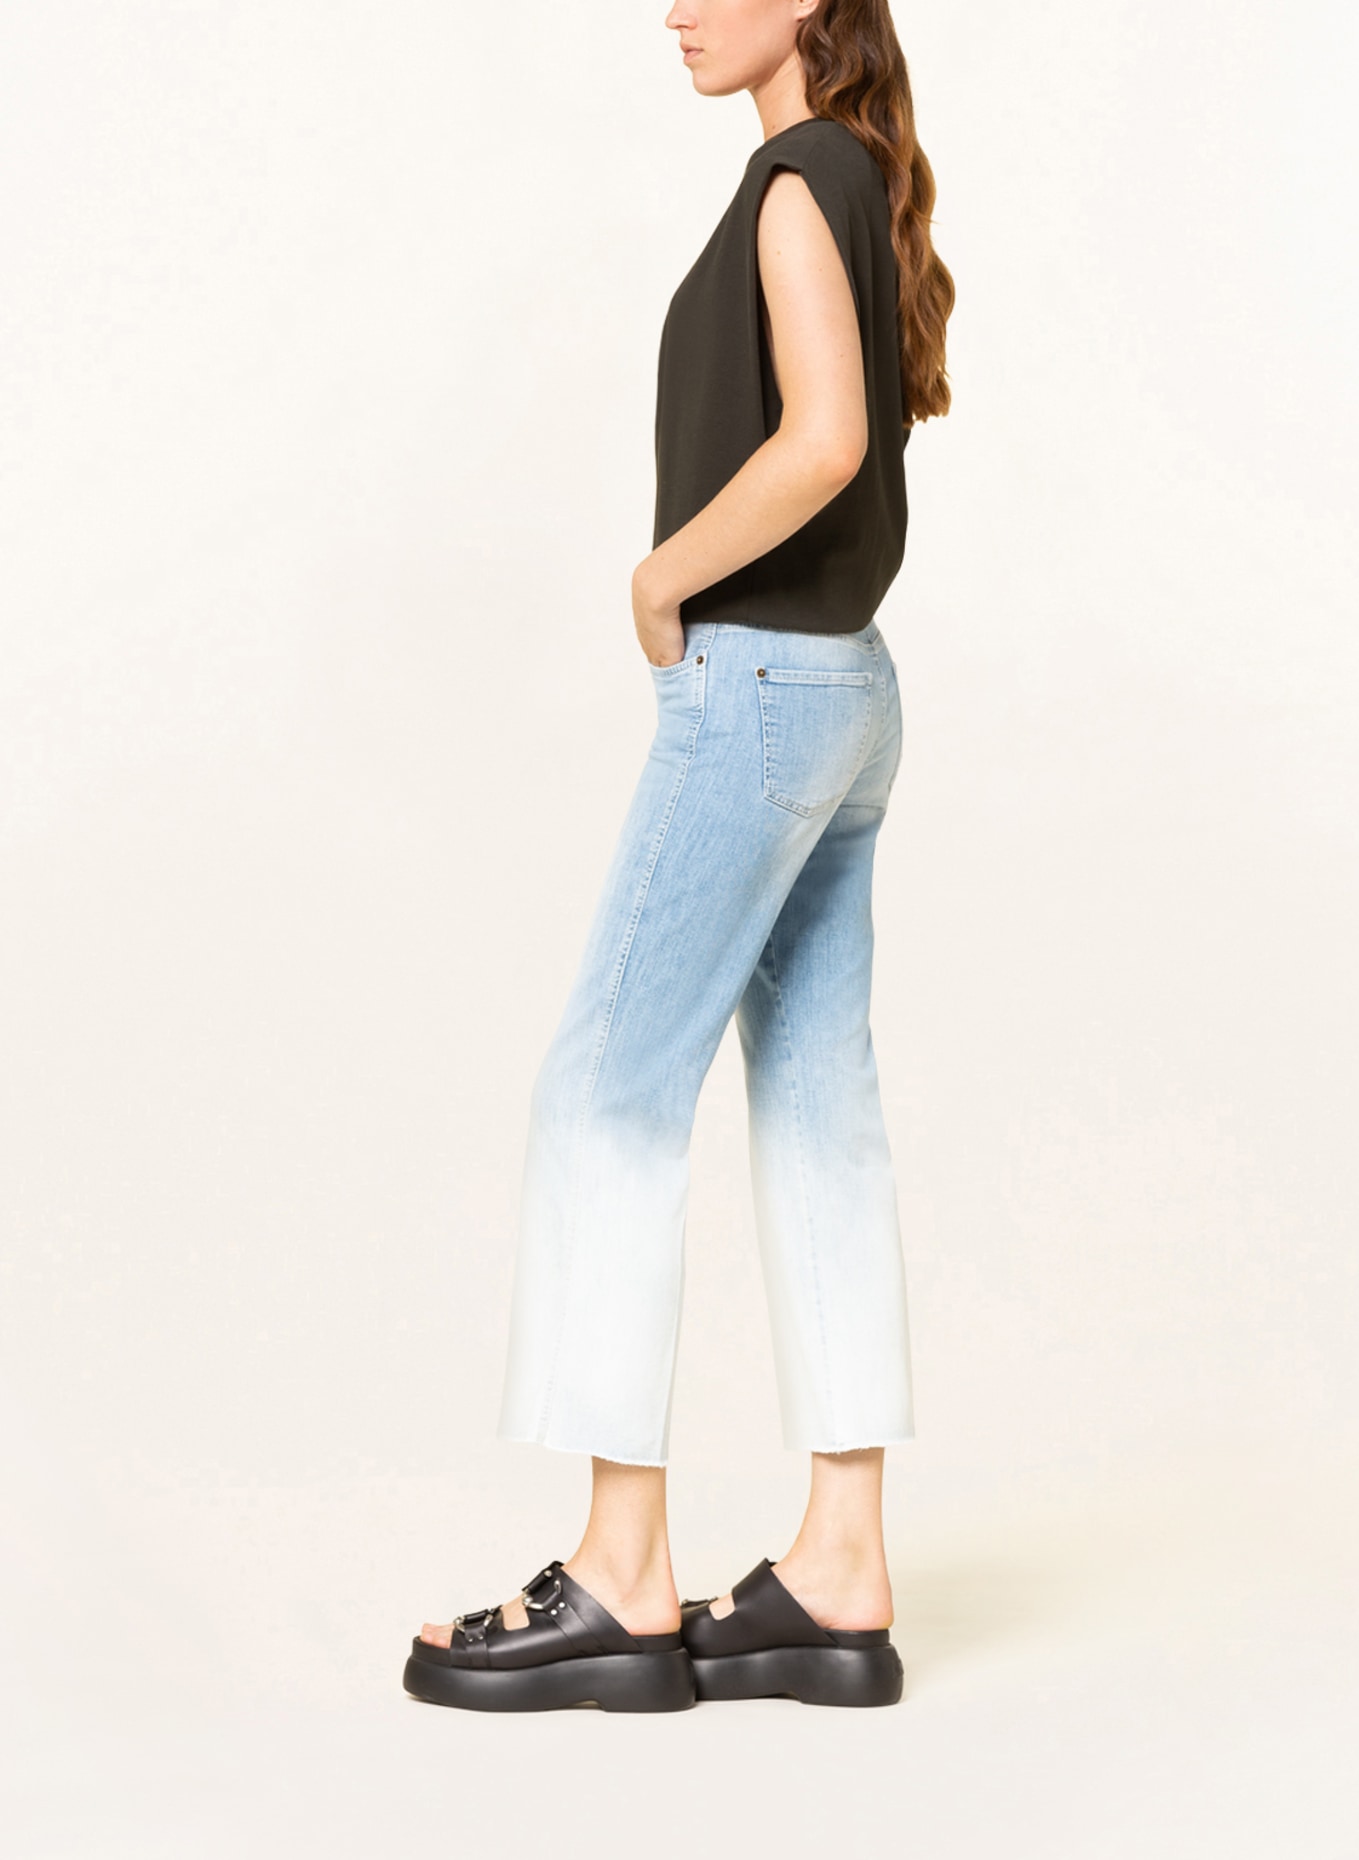 CAMBIO Bootcut jeans FRANCESCA, Color: 5323 summer degrade fringed he (Image 4)